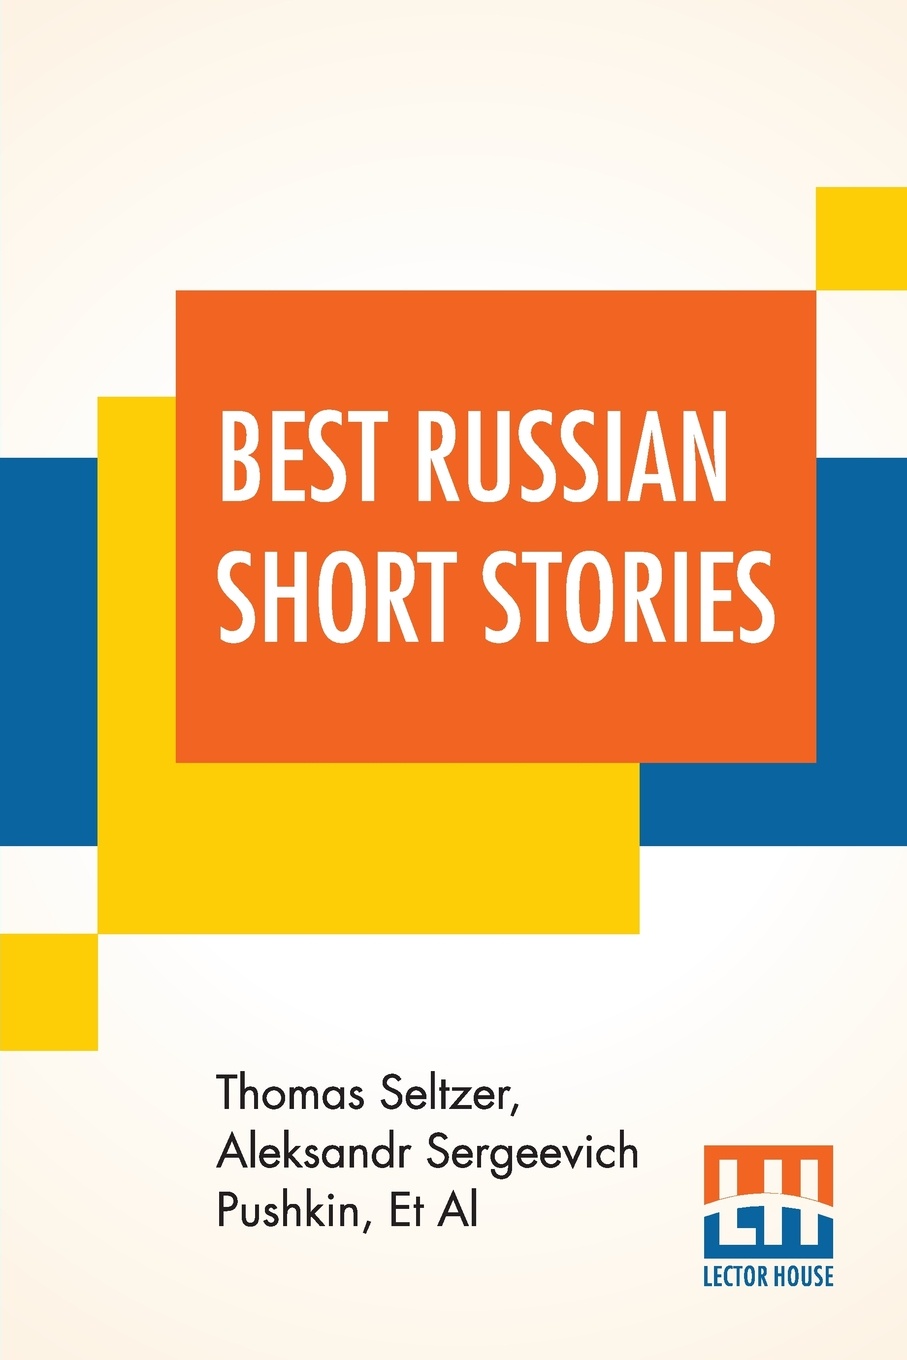 Best Russian Short Stories. Compiled And Edited By Thomas Seltzer